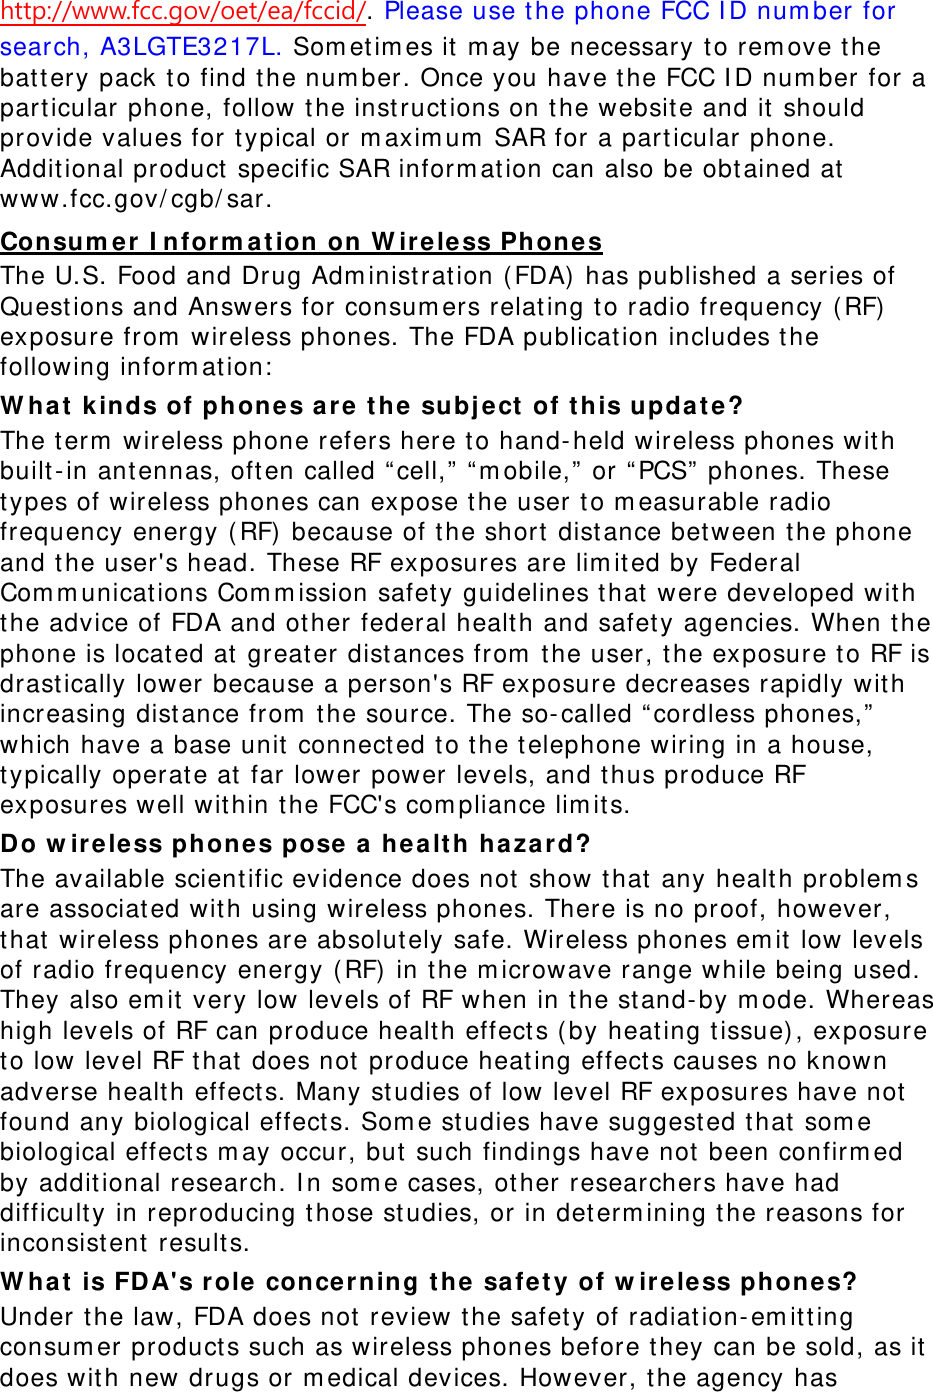 http://www.fcc.gov/oet/ea/fccid/. Please use the phone FCC ID number for search, A3LGTE3217L. Sometimes it may be necessary to remove the battery pack to find the number. Once you have the FCC ID number for a particular phone, follow the instructions on the website and it should provide values for typical or maximum SAR for a particular phone. Additional product specific SAR information can also be obtained at www.fcc.gov/cgb/sar. Consumer Information on Wireless Phones The U.S. Food and Drug Administration (FDA) has published a series of Questions and Answers for consumers relating to radio frequency (RF) exposure from wireless phones. The FDA publication includes the following information: What kinds of phones are the subject of this update? The term wireless phone refers here to hand-held wireless phones with built-in antennas, often called “cell,” “mobile,” or “PCS” phones. These types of wireless phones can expose the user to measurable radio frequency energy (RF) because of the short distance between the phone and the user&apos;s head. These RF exposures are limited by Federal Communications Commission safety guidelines that were developed with the advice of FDA and other federal health and safety agencies. When the phone is located at greater distances from the user, the exposure to RF is drastically lower because a person&apos;s RF exposure decreases rapidly with increasing distance from the source. The so-called “cordless phones,” which have a base unit connected to the telephone wiring in a house, typically operate at far lower power levels, and thus produce RF exposures well within the FCC&apos;s compliance limits. Do wireless phones pose a health hazard? The available scientific evidence does not show that any health problems are associated with using wireless phones. There is no proof, however, that wireless phones are absolutely safe. Wireless phones emit low levels of radio frequency energy (RF) in the microwave range while being used. They also emit very low levels of RF when in the stand-by mode. Whereas high levels of RF can produce health effects (by heating tissue), exposure to low level RF that does not produce heating effects causes no known adverse health effects. Many studies of low level RF exposures have not found any biological effects. Some studies have suggested that some biological effects may occur, but such findings have not been confirmed by additional research. In some cases, other researchers have had difficulty in reproducing those studies, or in determining the reasons for inconsistent results. What is FDA&apos;s role concerning the safety of wireless phones? Under the law, FDA does not review the safety of radiation-emitting consumer products such as wireless phones before they can be sold, as it does with new drugs or medical devices. However, the agency has 